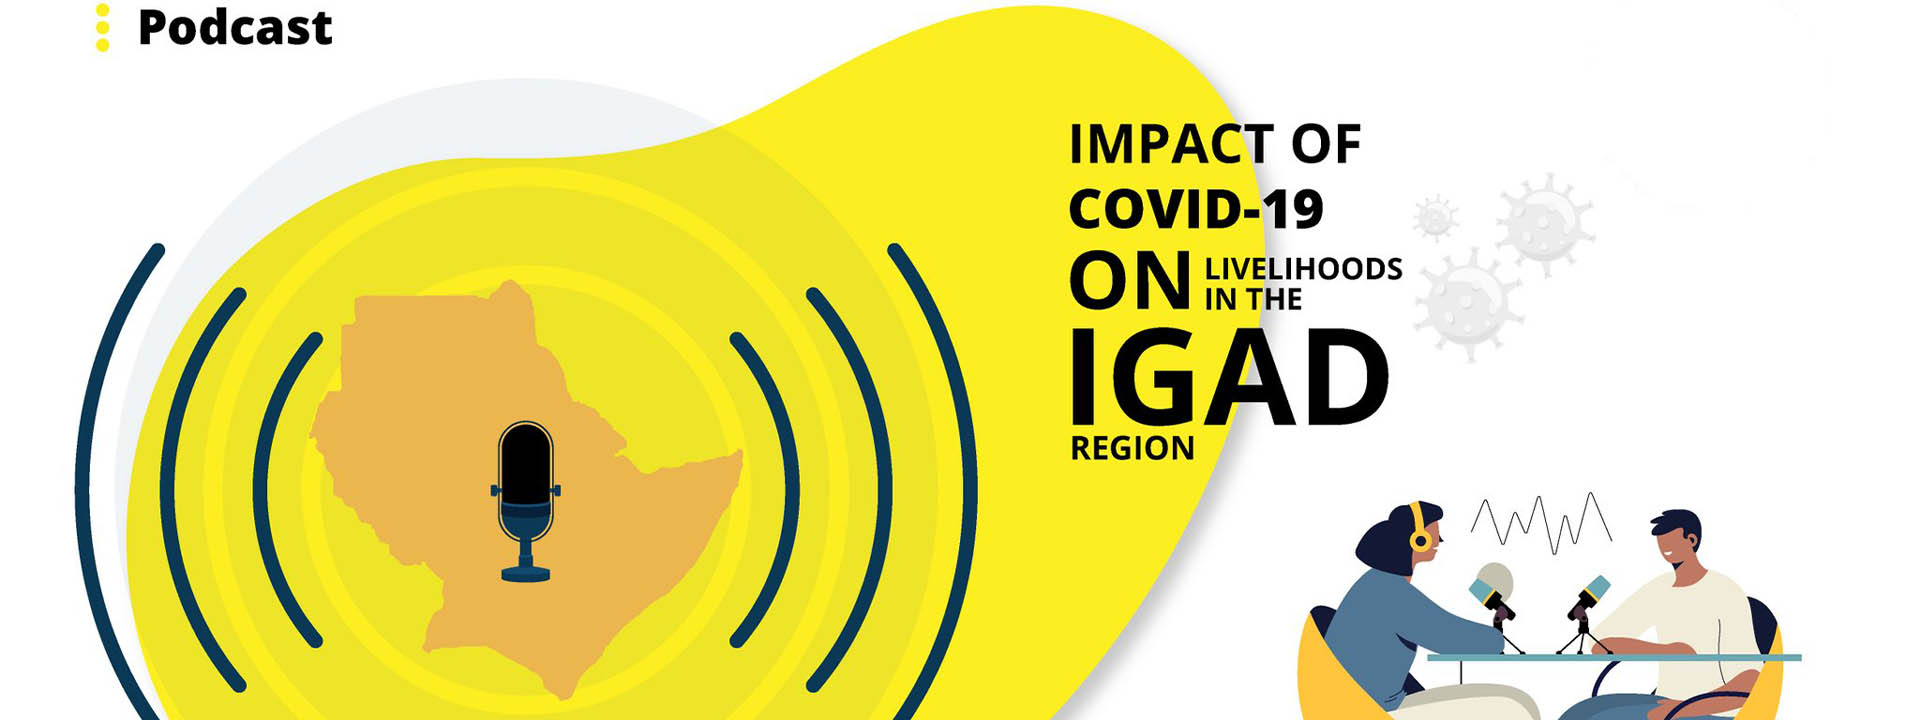 Impact of COVID-19 On Trade and Tourism in IGAD Region